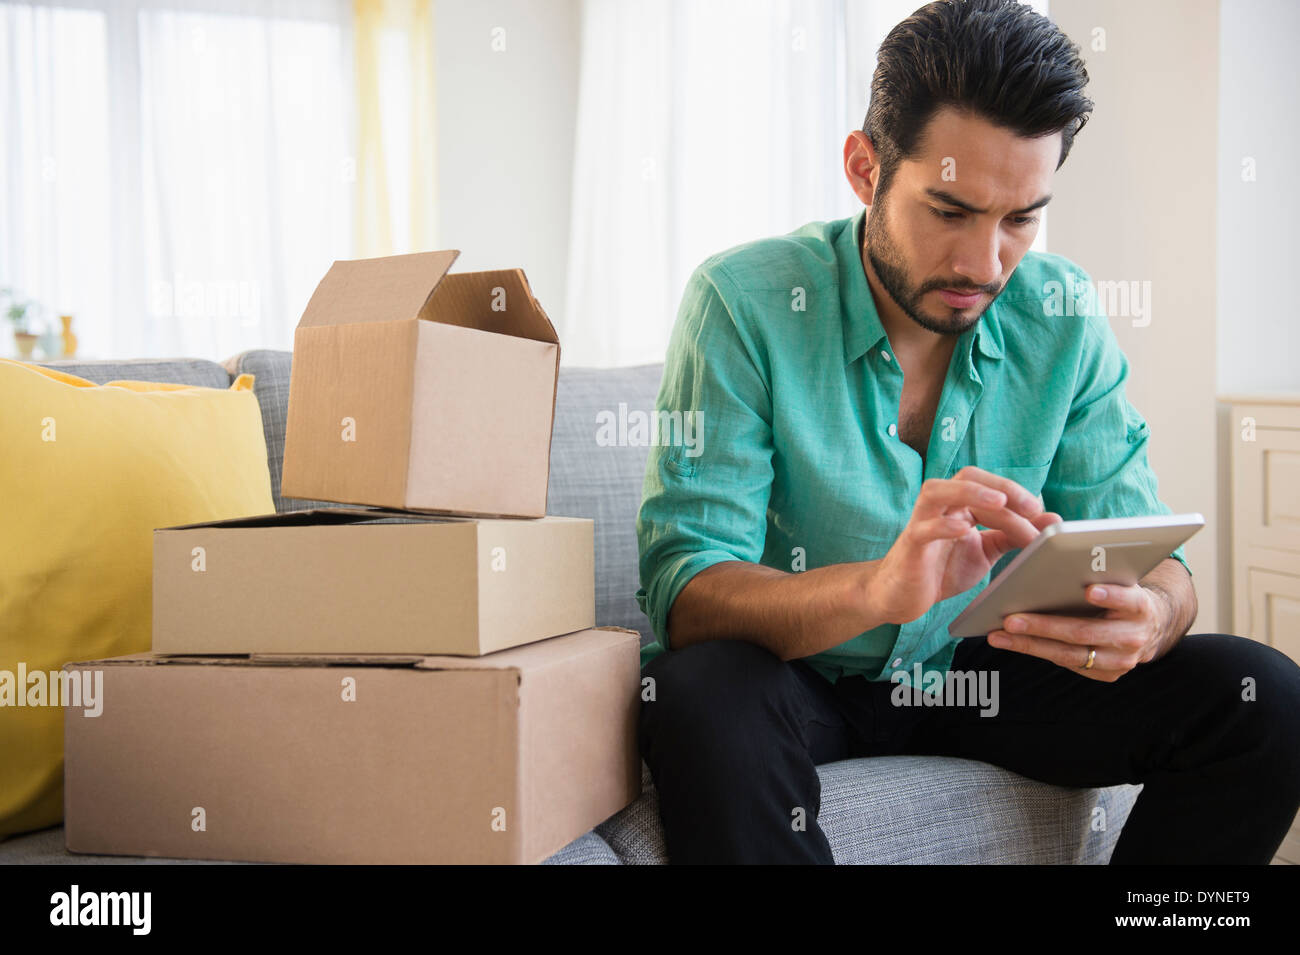 Mixed race man using digital tablet and moving Stock Photo